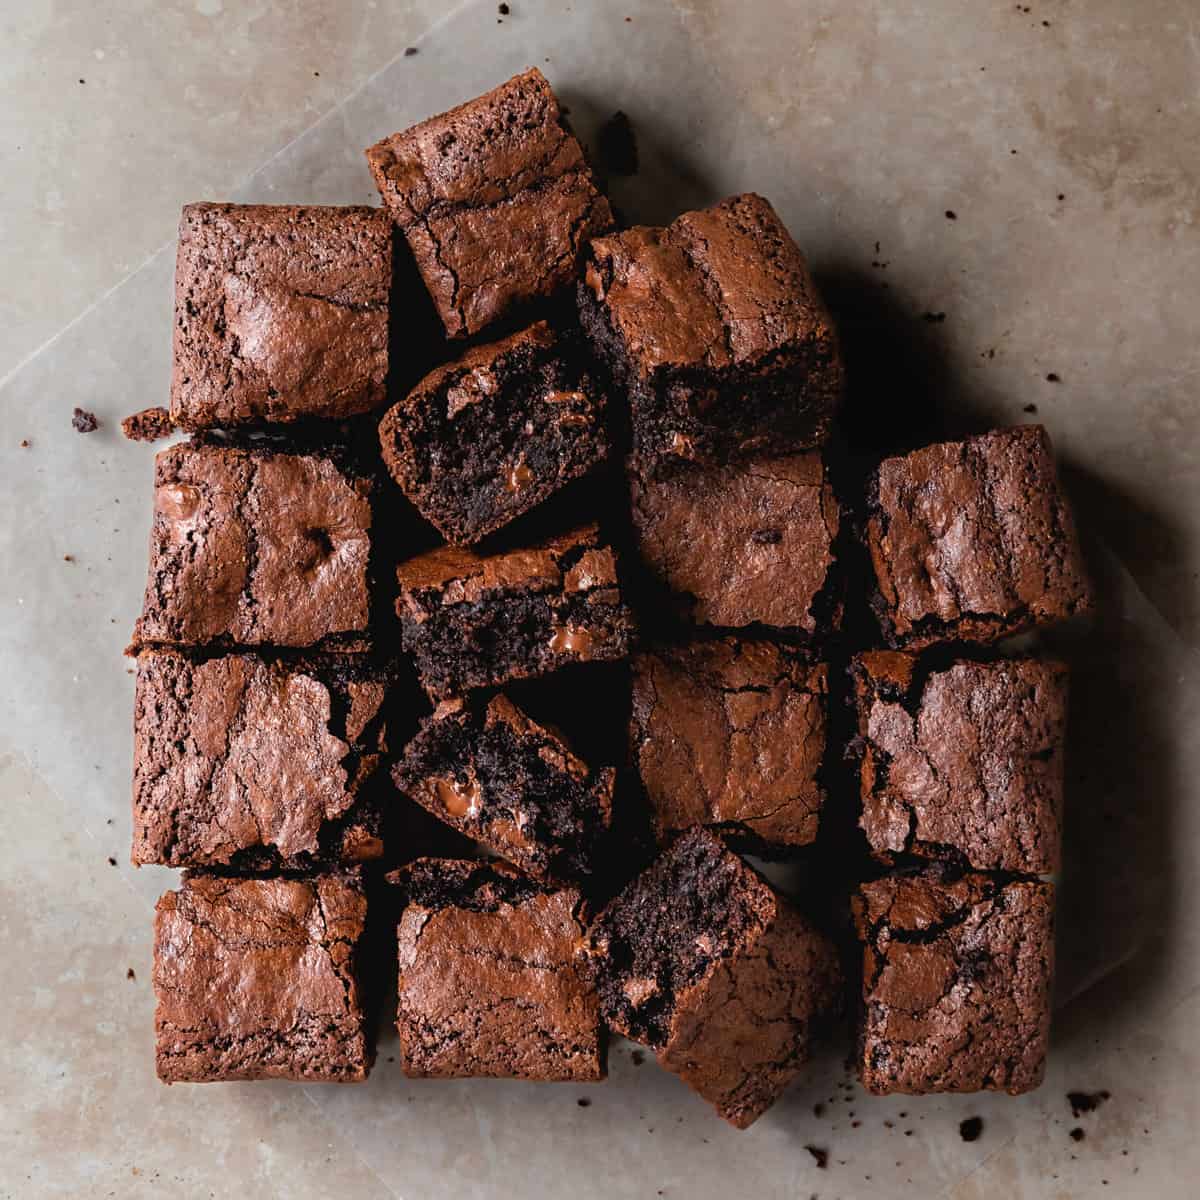 Step-by-Step Instructions for Making Salted Almond Brownies